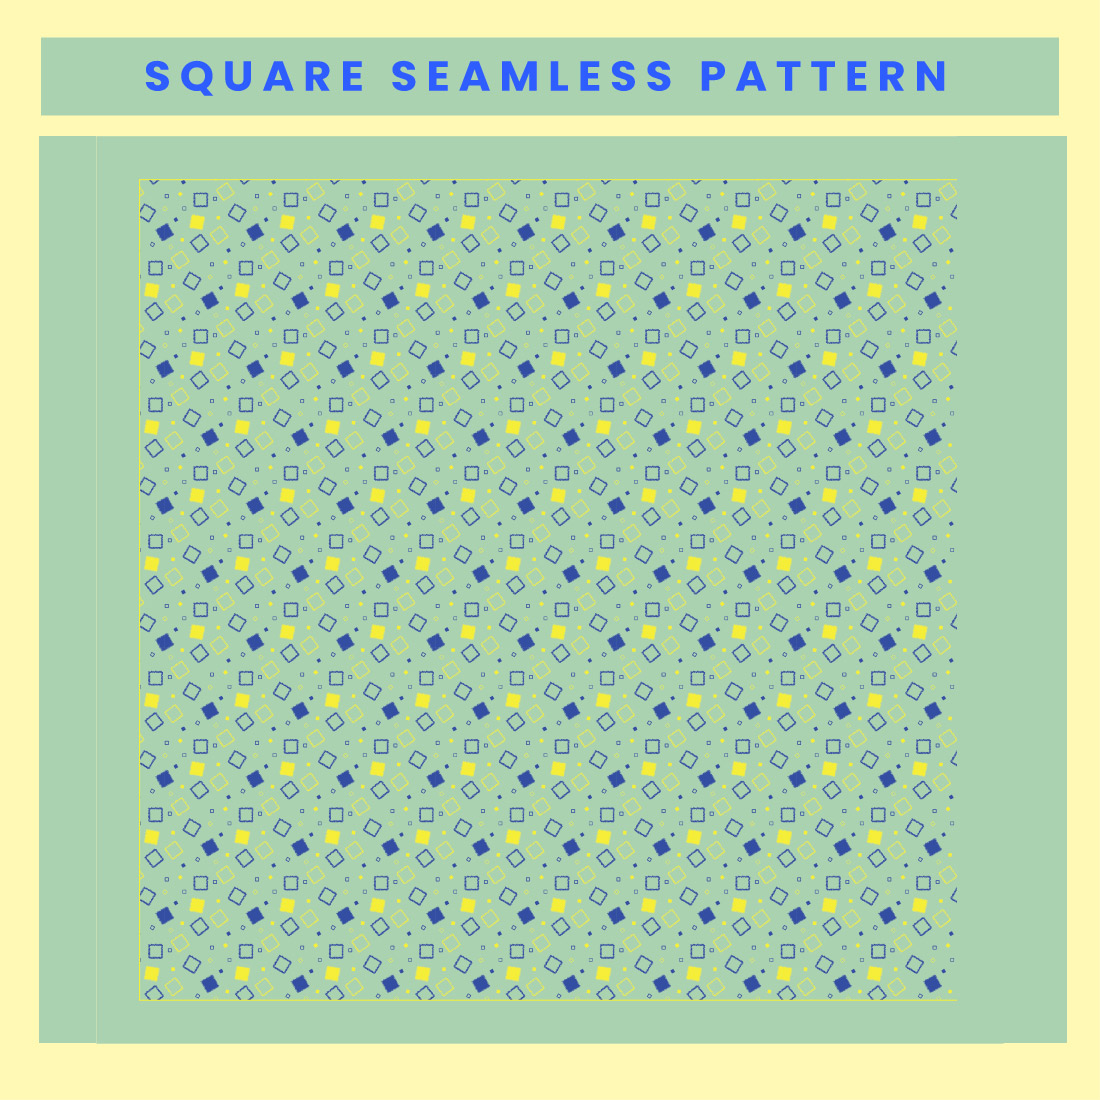 Square Seamless Pattern cover image.